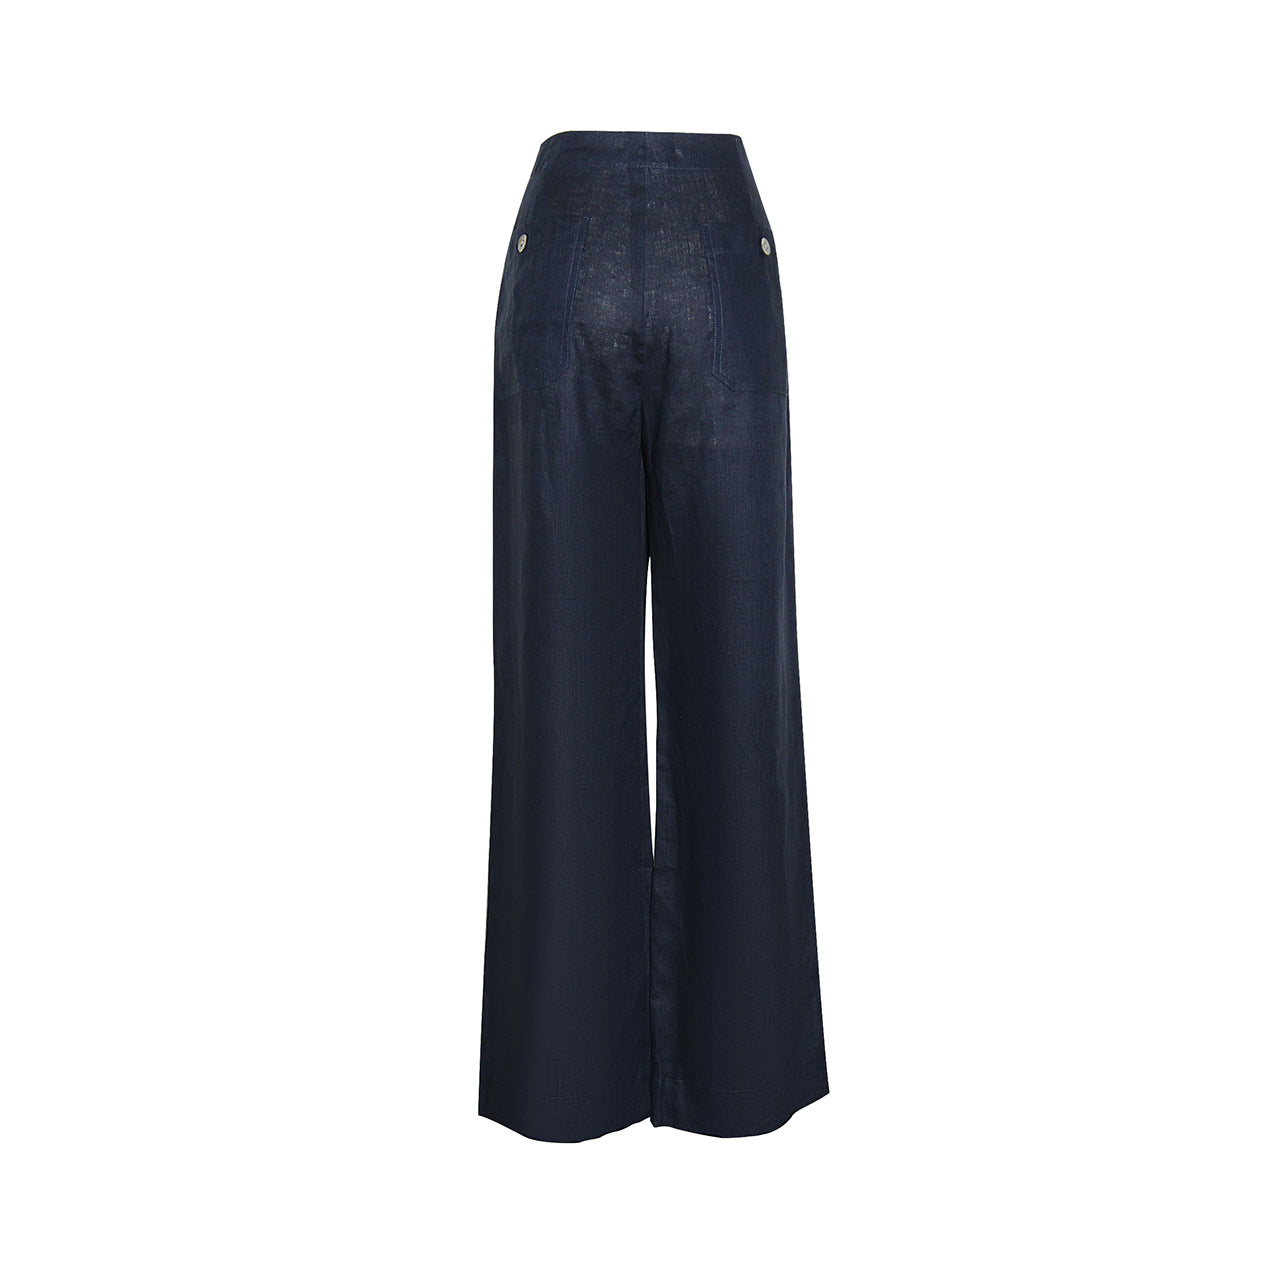 Upgrade Your Wardrobe with SOFIA Linen Pants